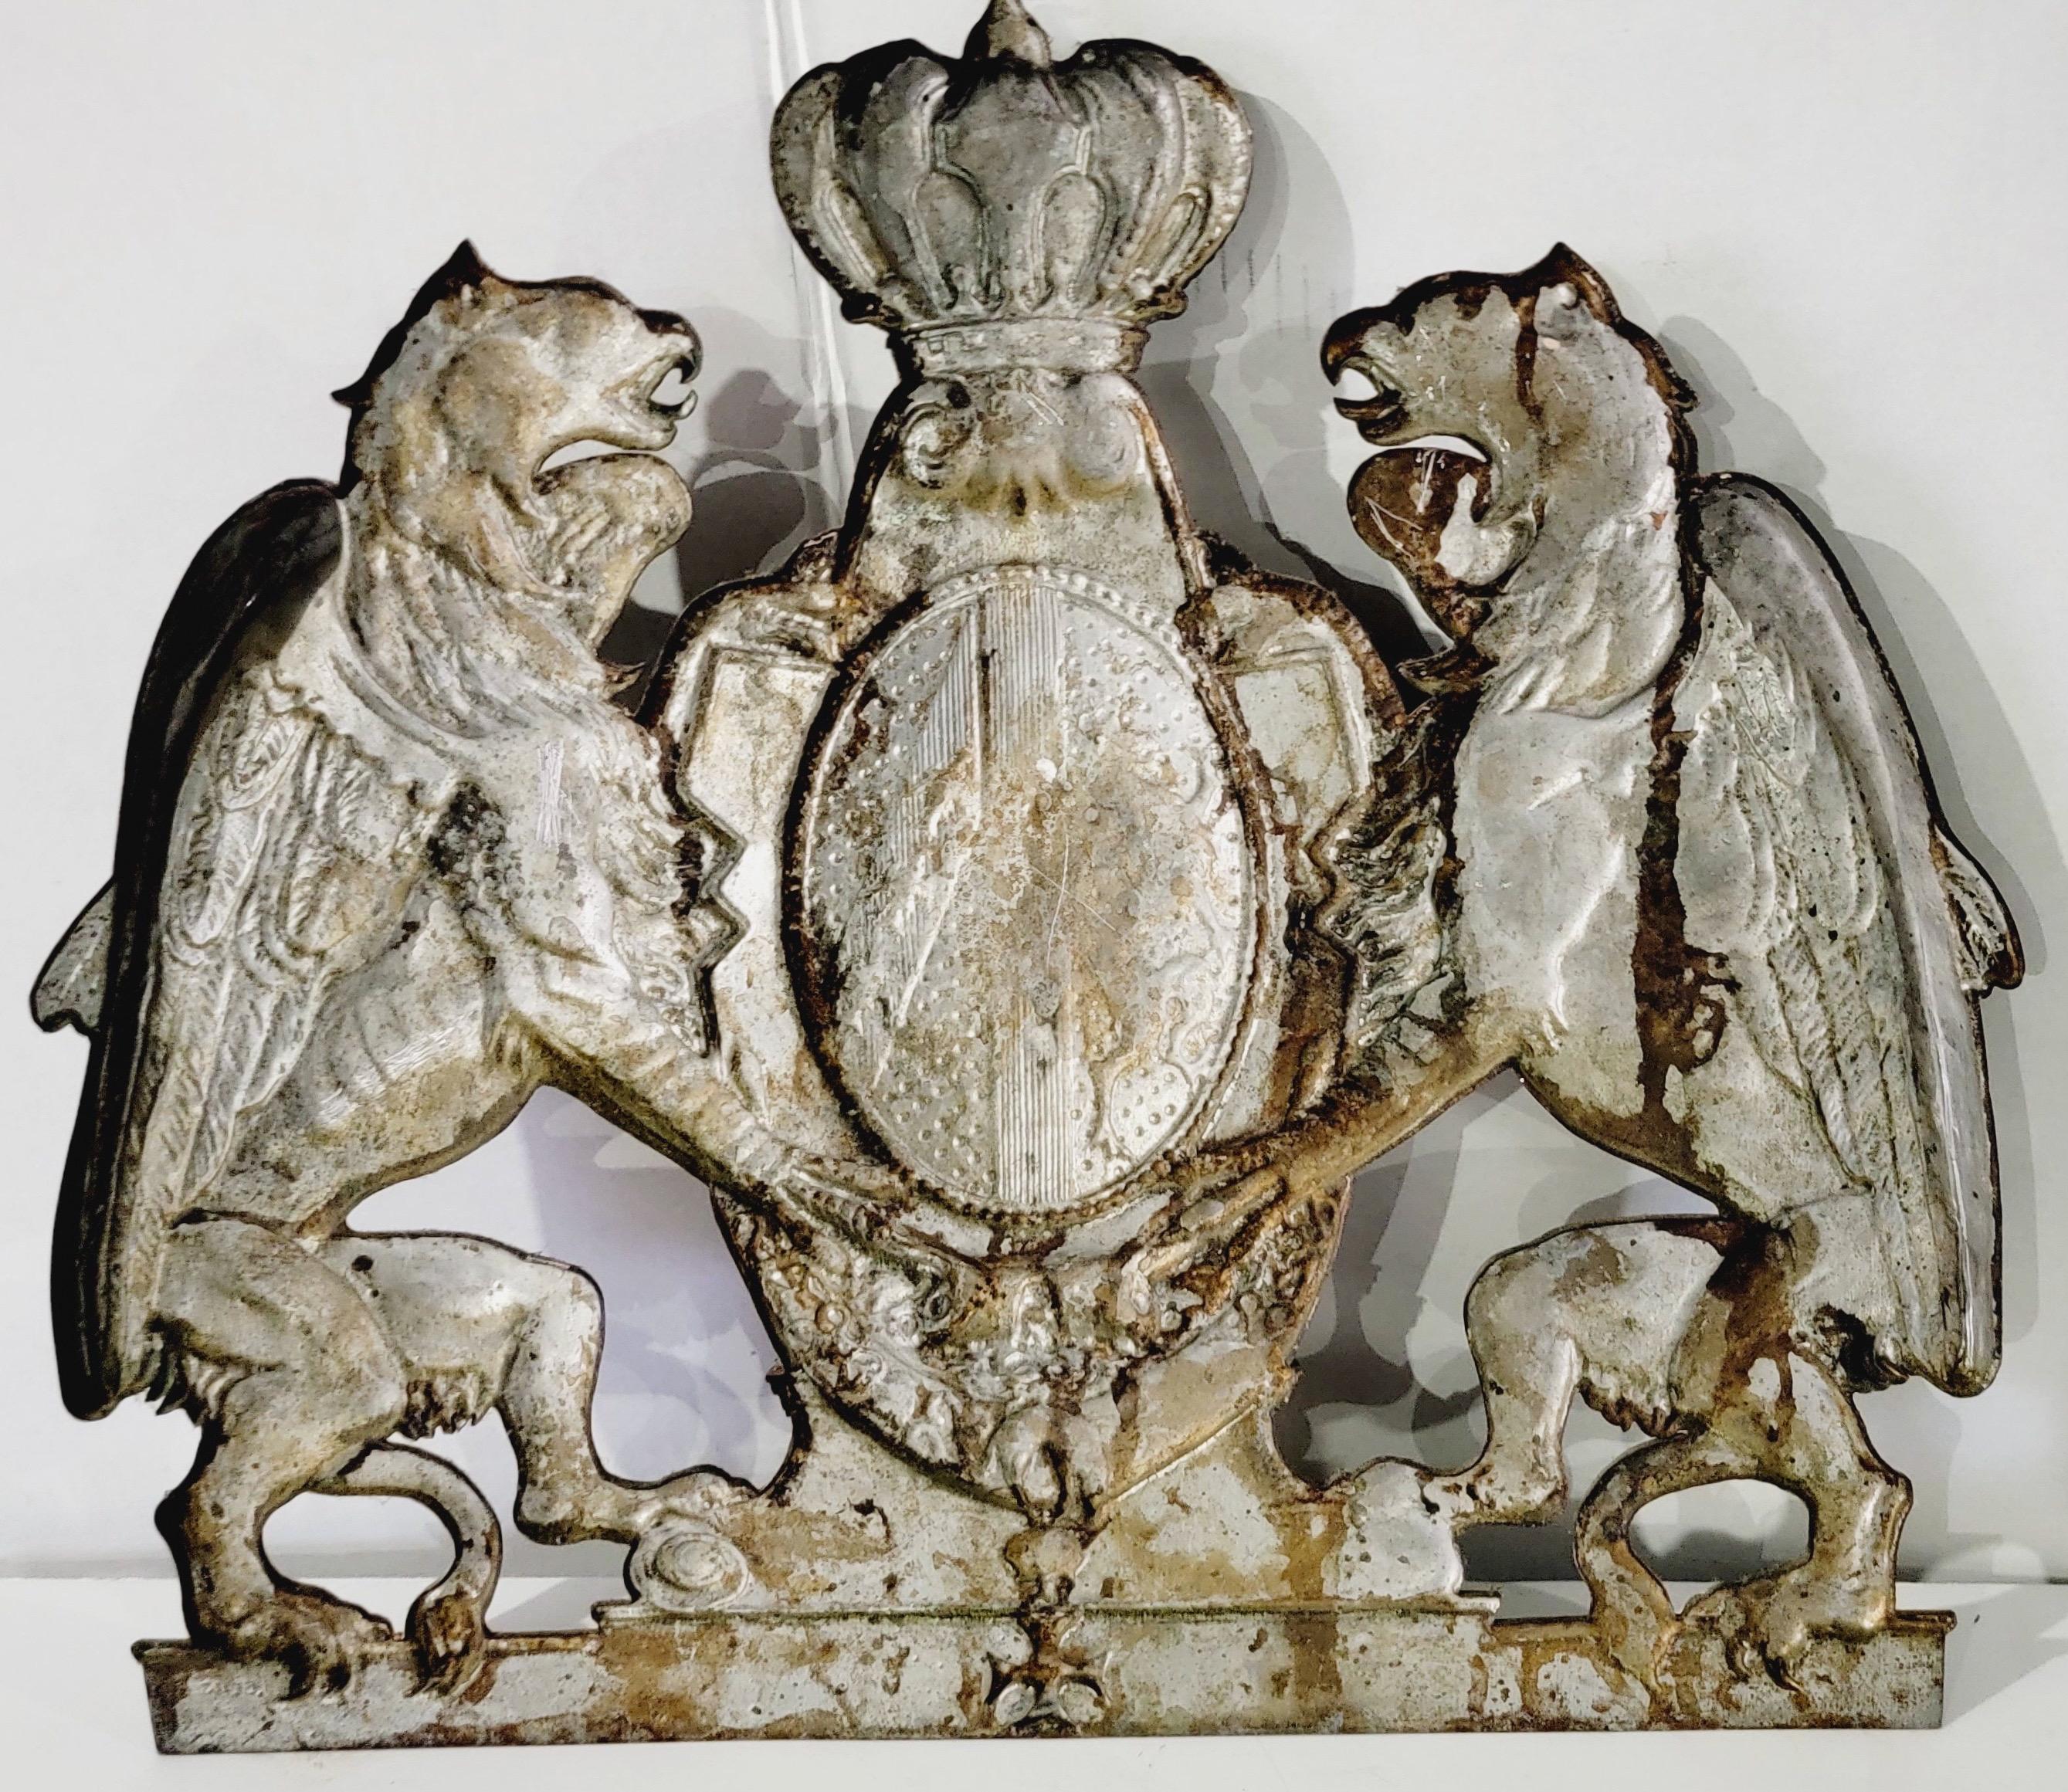 This is an antique English embossed armorial wall plaque in very good condition. What a great look! It depicts two lions supporting a shield under a crown.